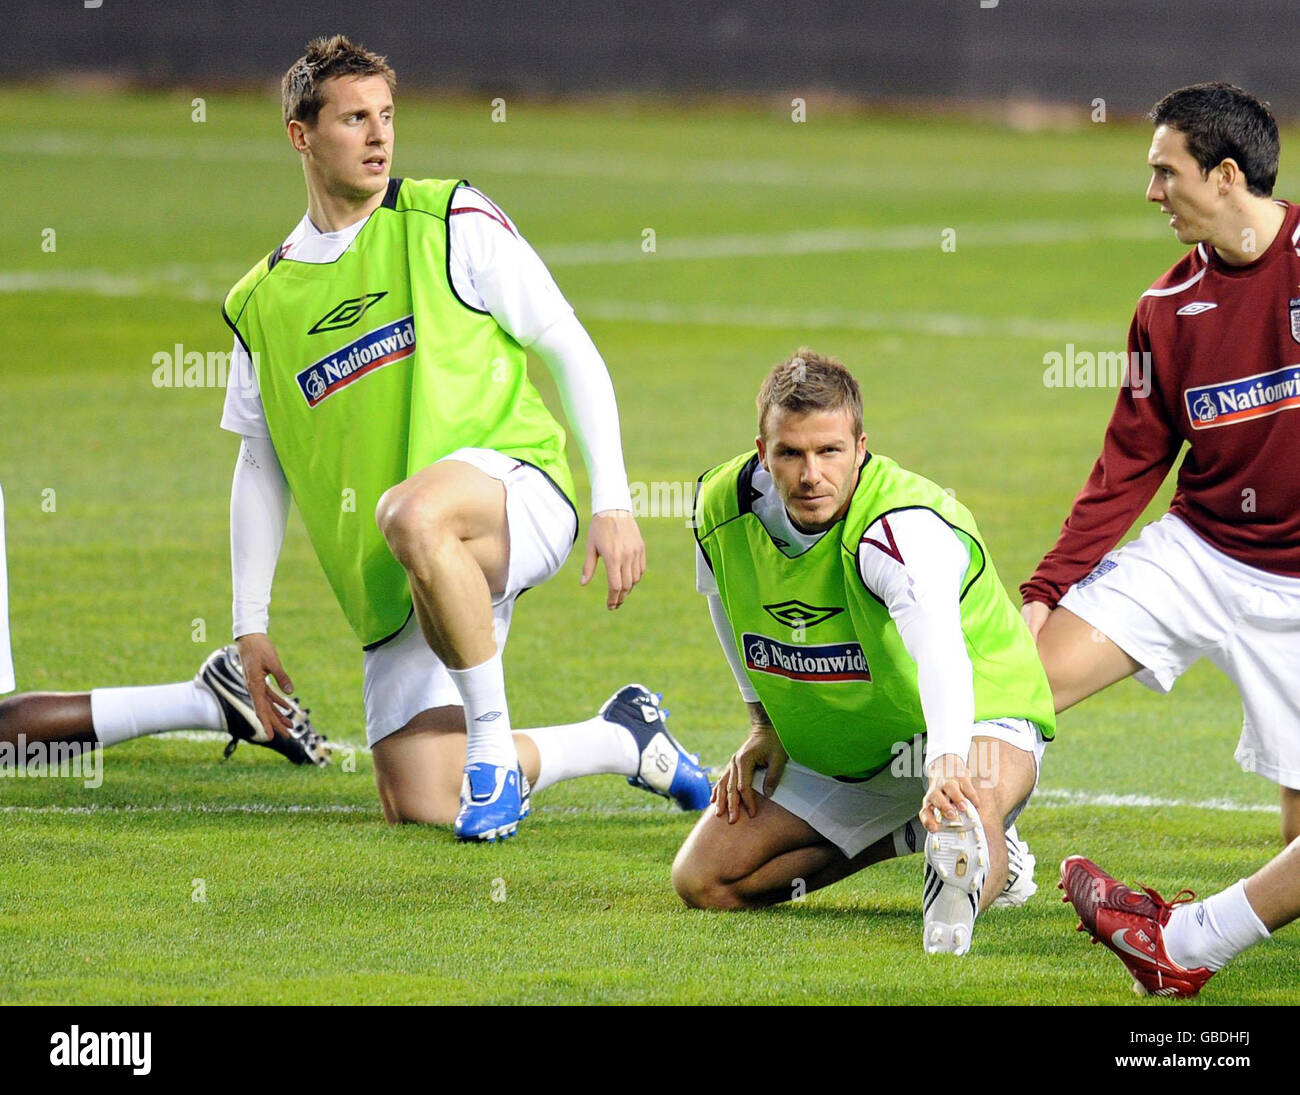 England's Phil Jagielka (left), David Beckham (centre) and Stewart Downing during a training session at the Ramon Sanchez Pizjuan Stadium in Seville, Spain. Stock Photo